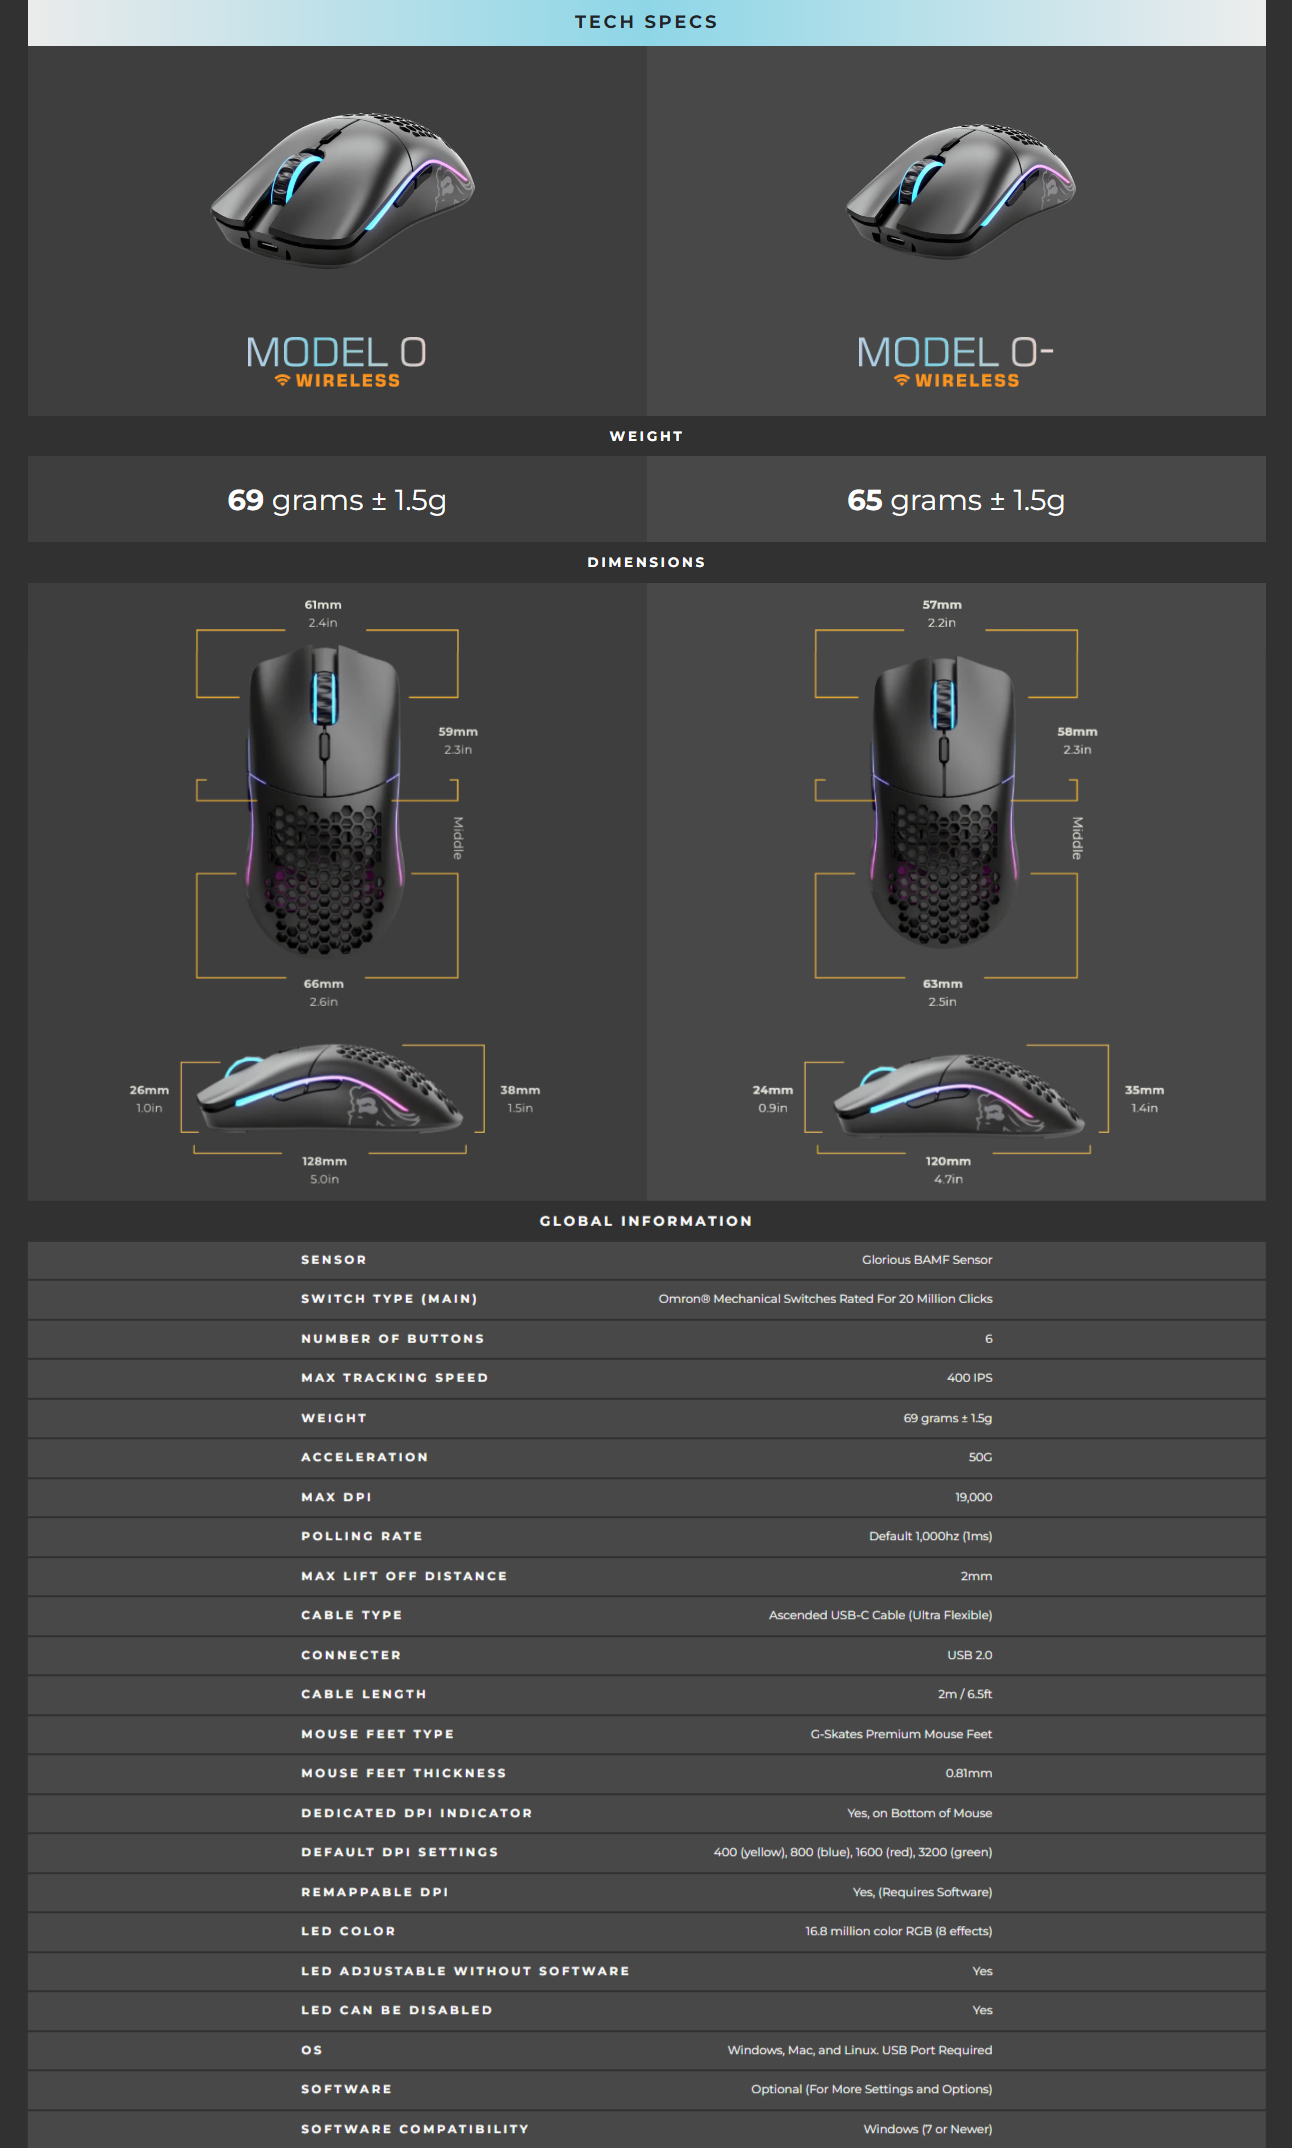 A large marketing image providing additional information about the product Glorious Model O Minus Ambidextrous Wireless Gaming Mouse - Matte Black - Additional alt info not provided